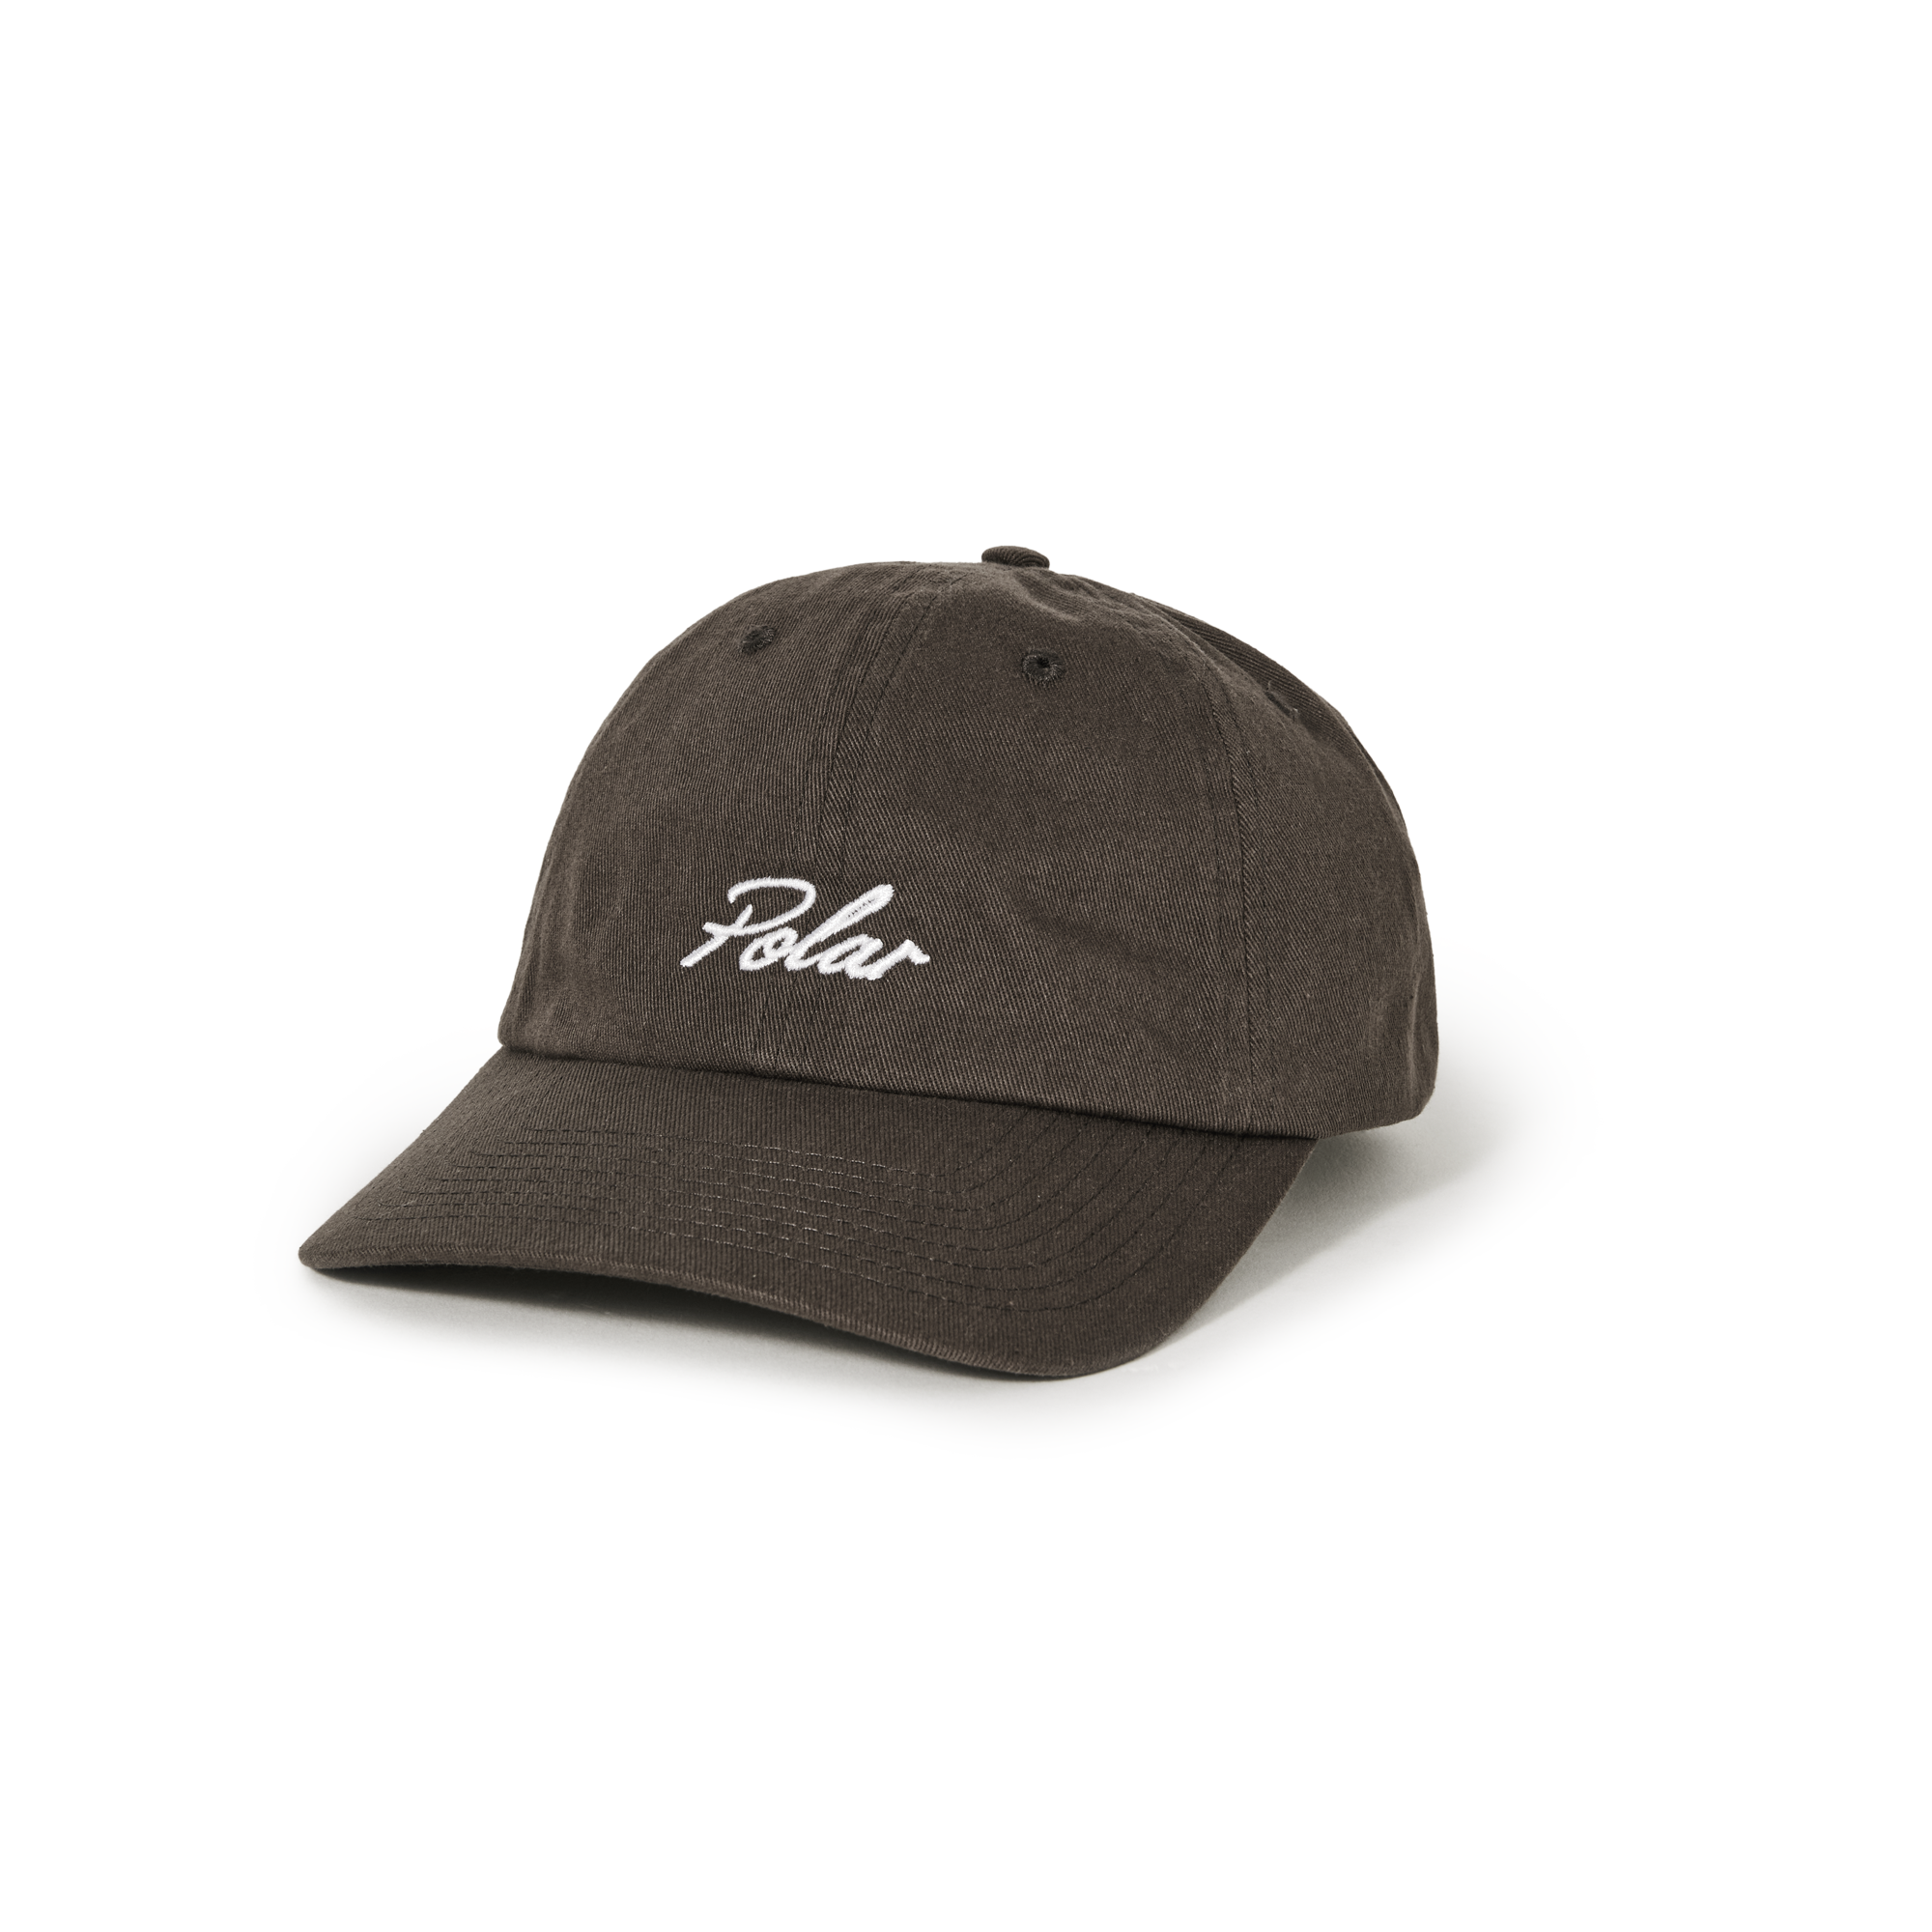 Brown polar six panel cap with white cursive logo on front and adjustable strap on back. Free uk shipping on orders over £50